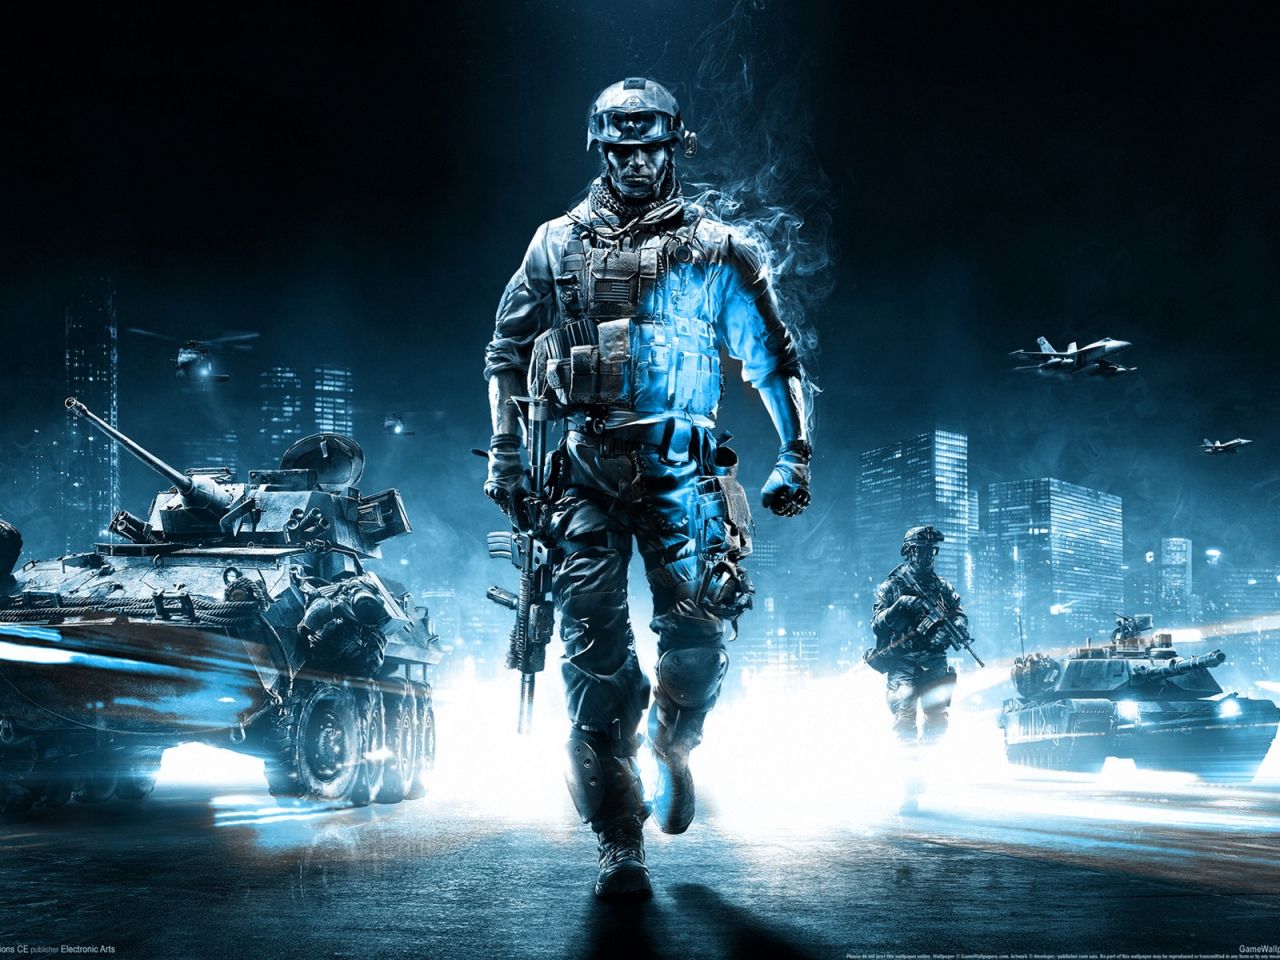 Battlefield 3 Action Game for 1280 x 960 resolution